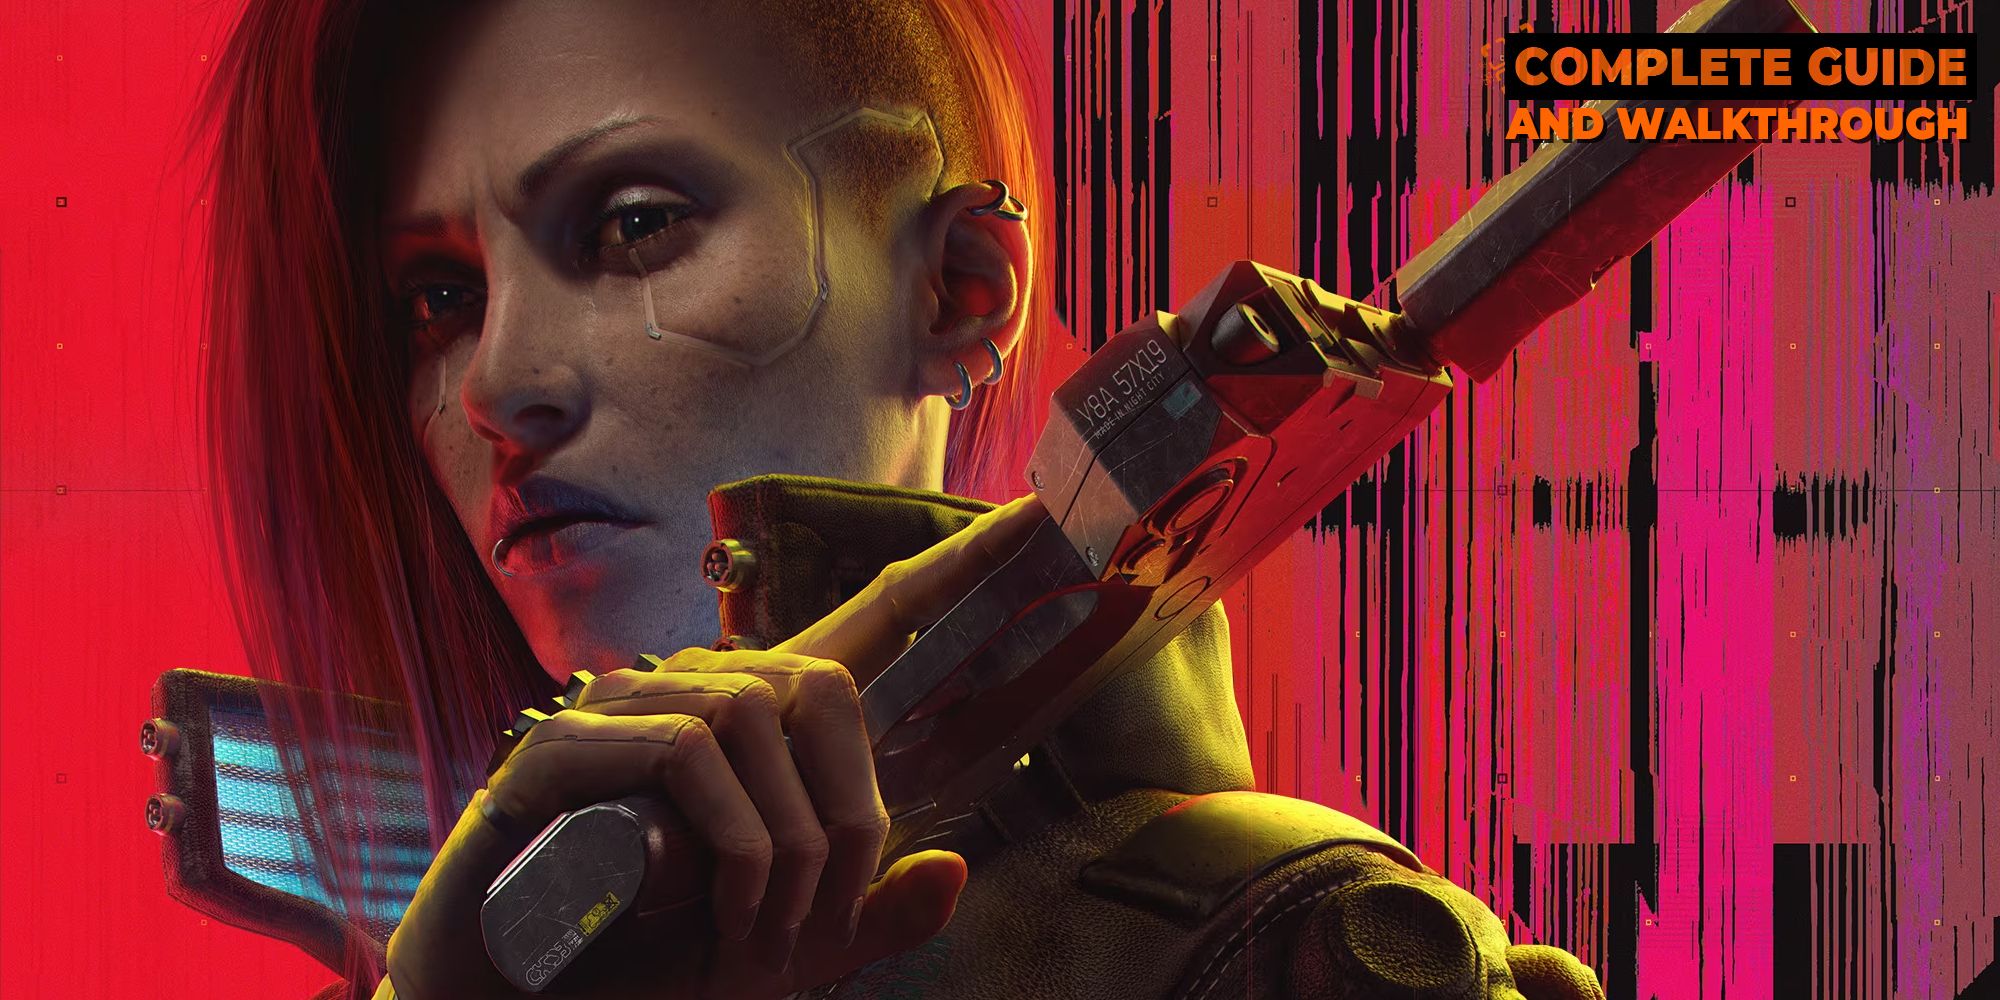 V holding a gun with a red background in Cyberpunk 2077.